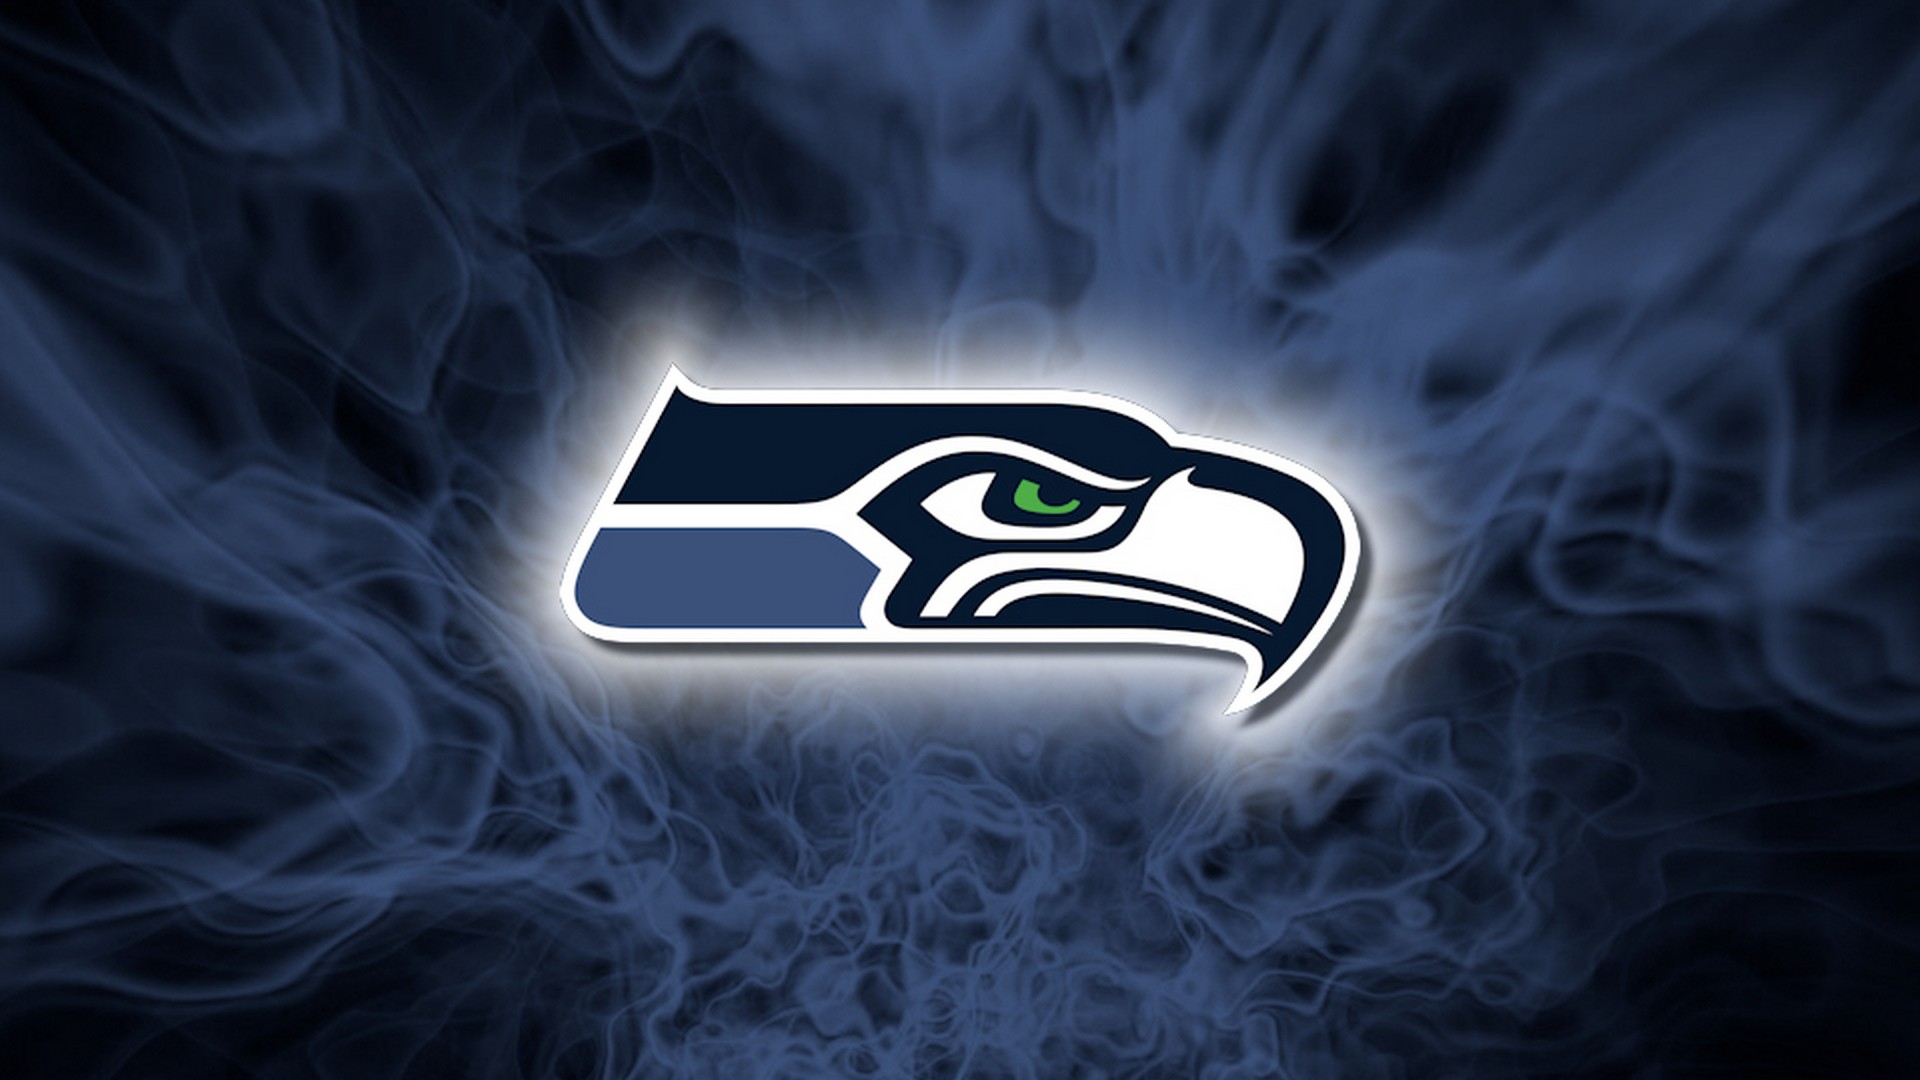 Wallpaper Desktop Seattle Seahawks HD With high-resolution 1920X1080 pixel. You can use this wallpaper for your Mac or Windows Desktop Background, iPhone, Android or Tablet and another Smartphone device